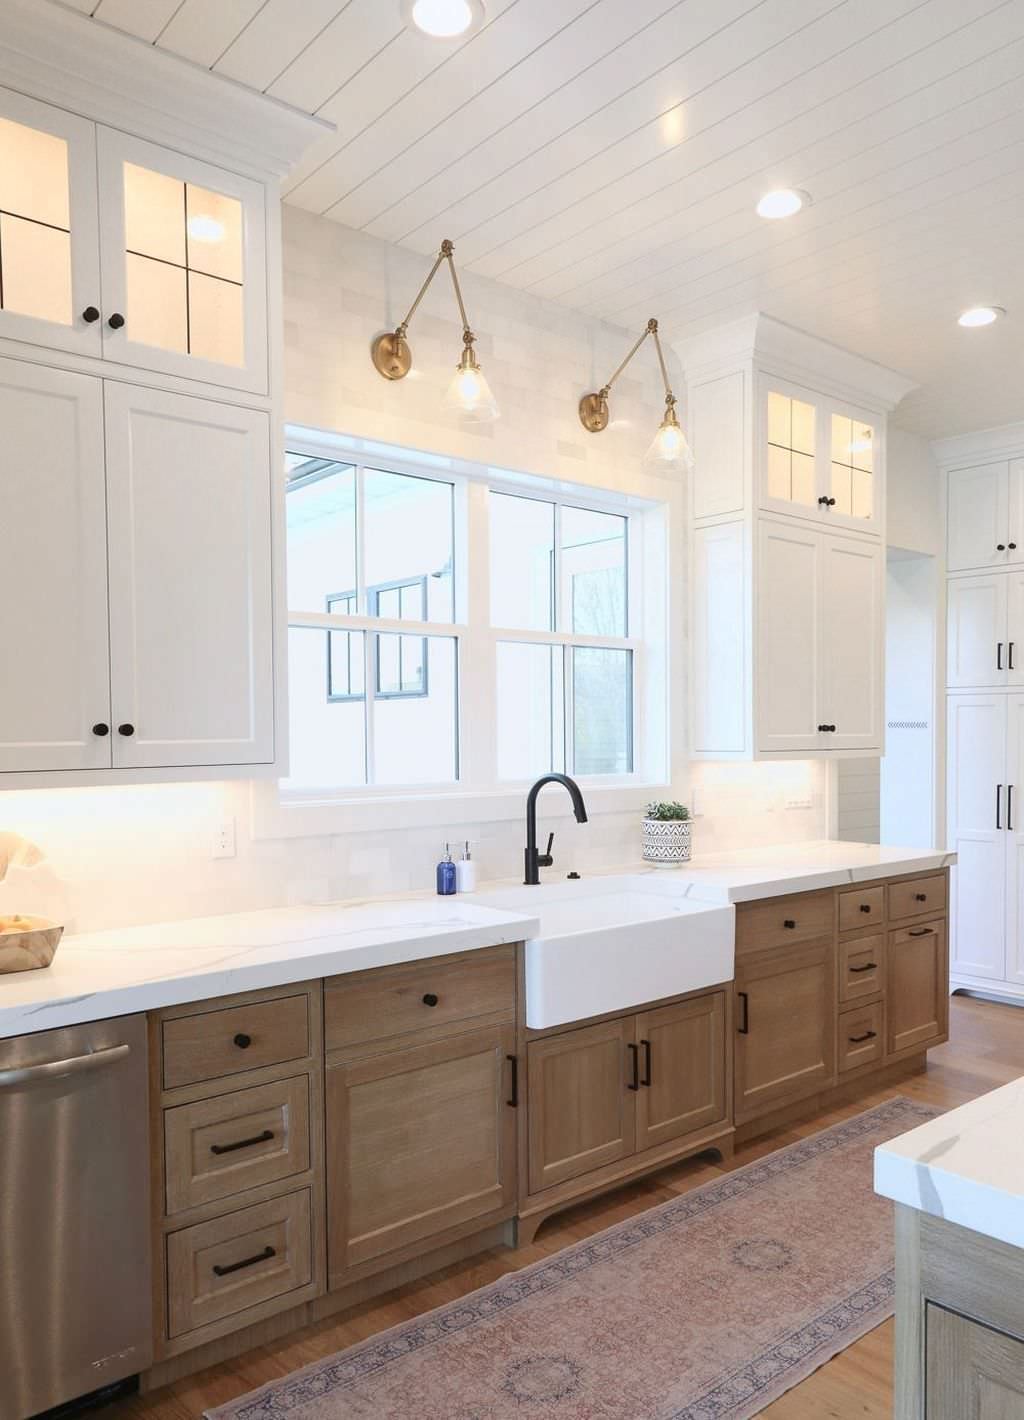 Kitchen With Light Wood Cabinets, White Quartz Countertops With Natural Wood Cabinets